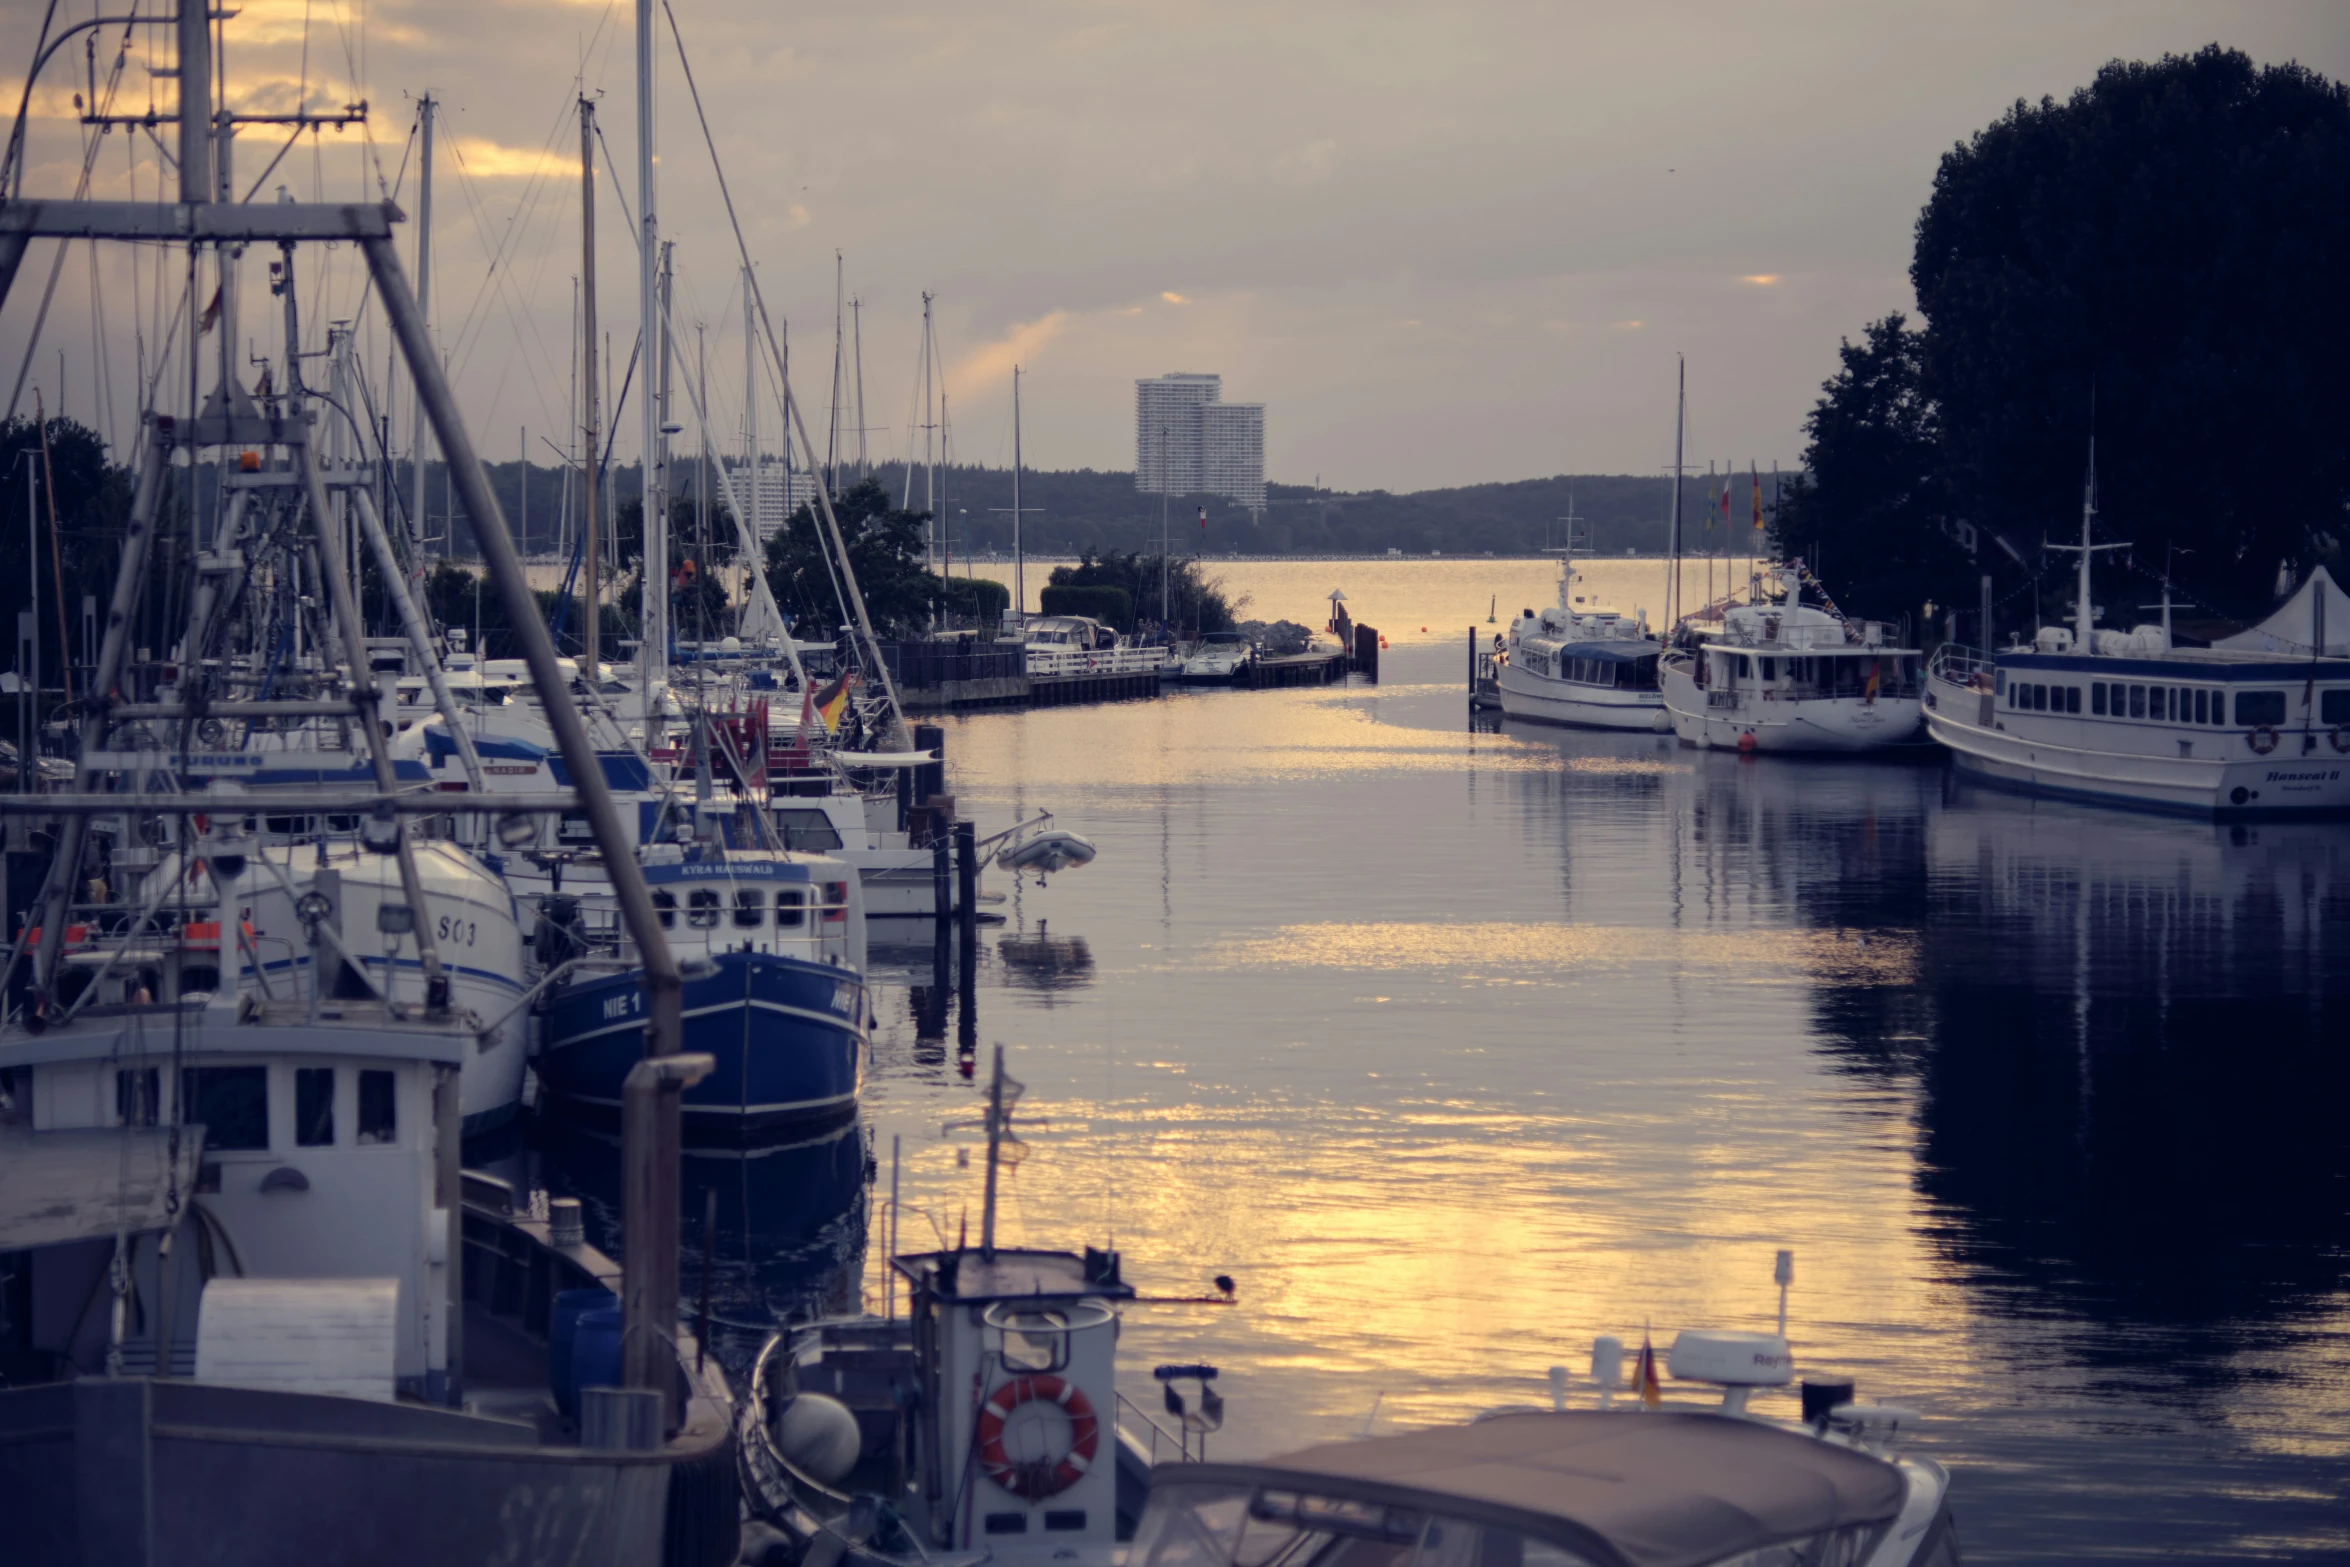 several boats sit in the marina as the sun sets